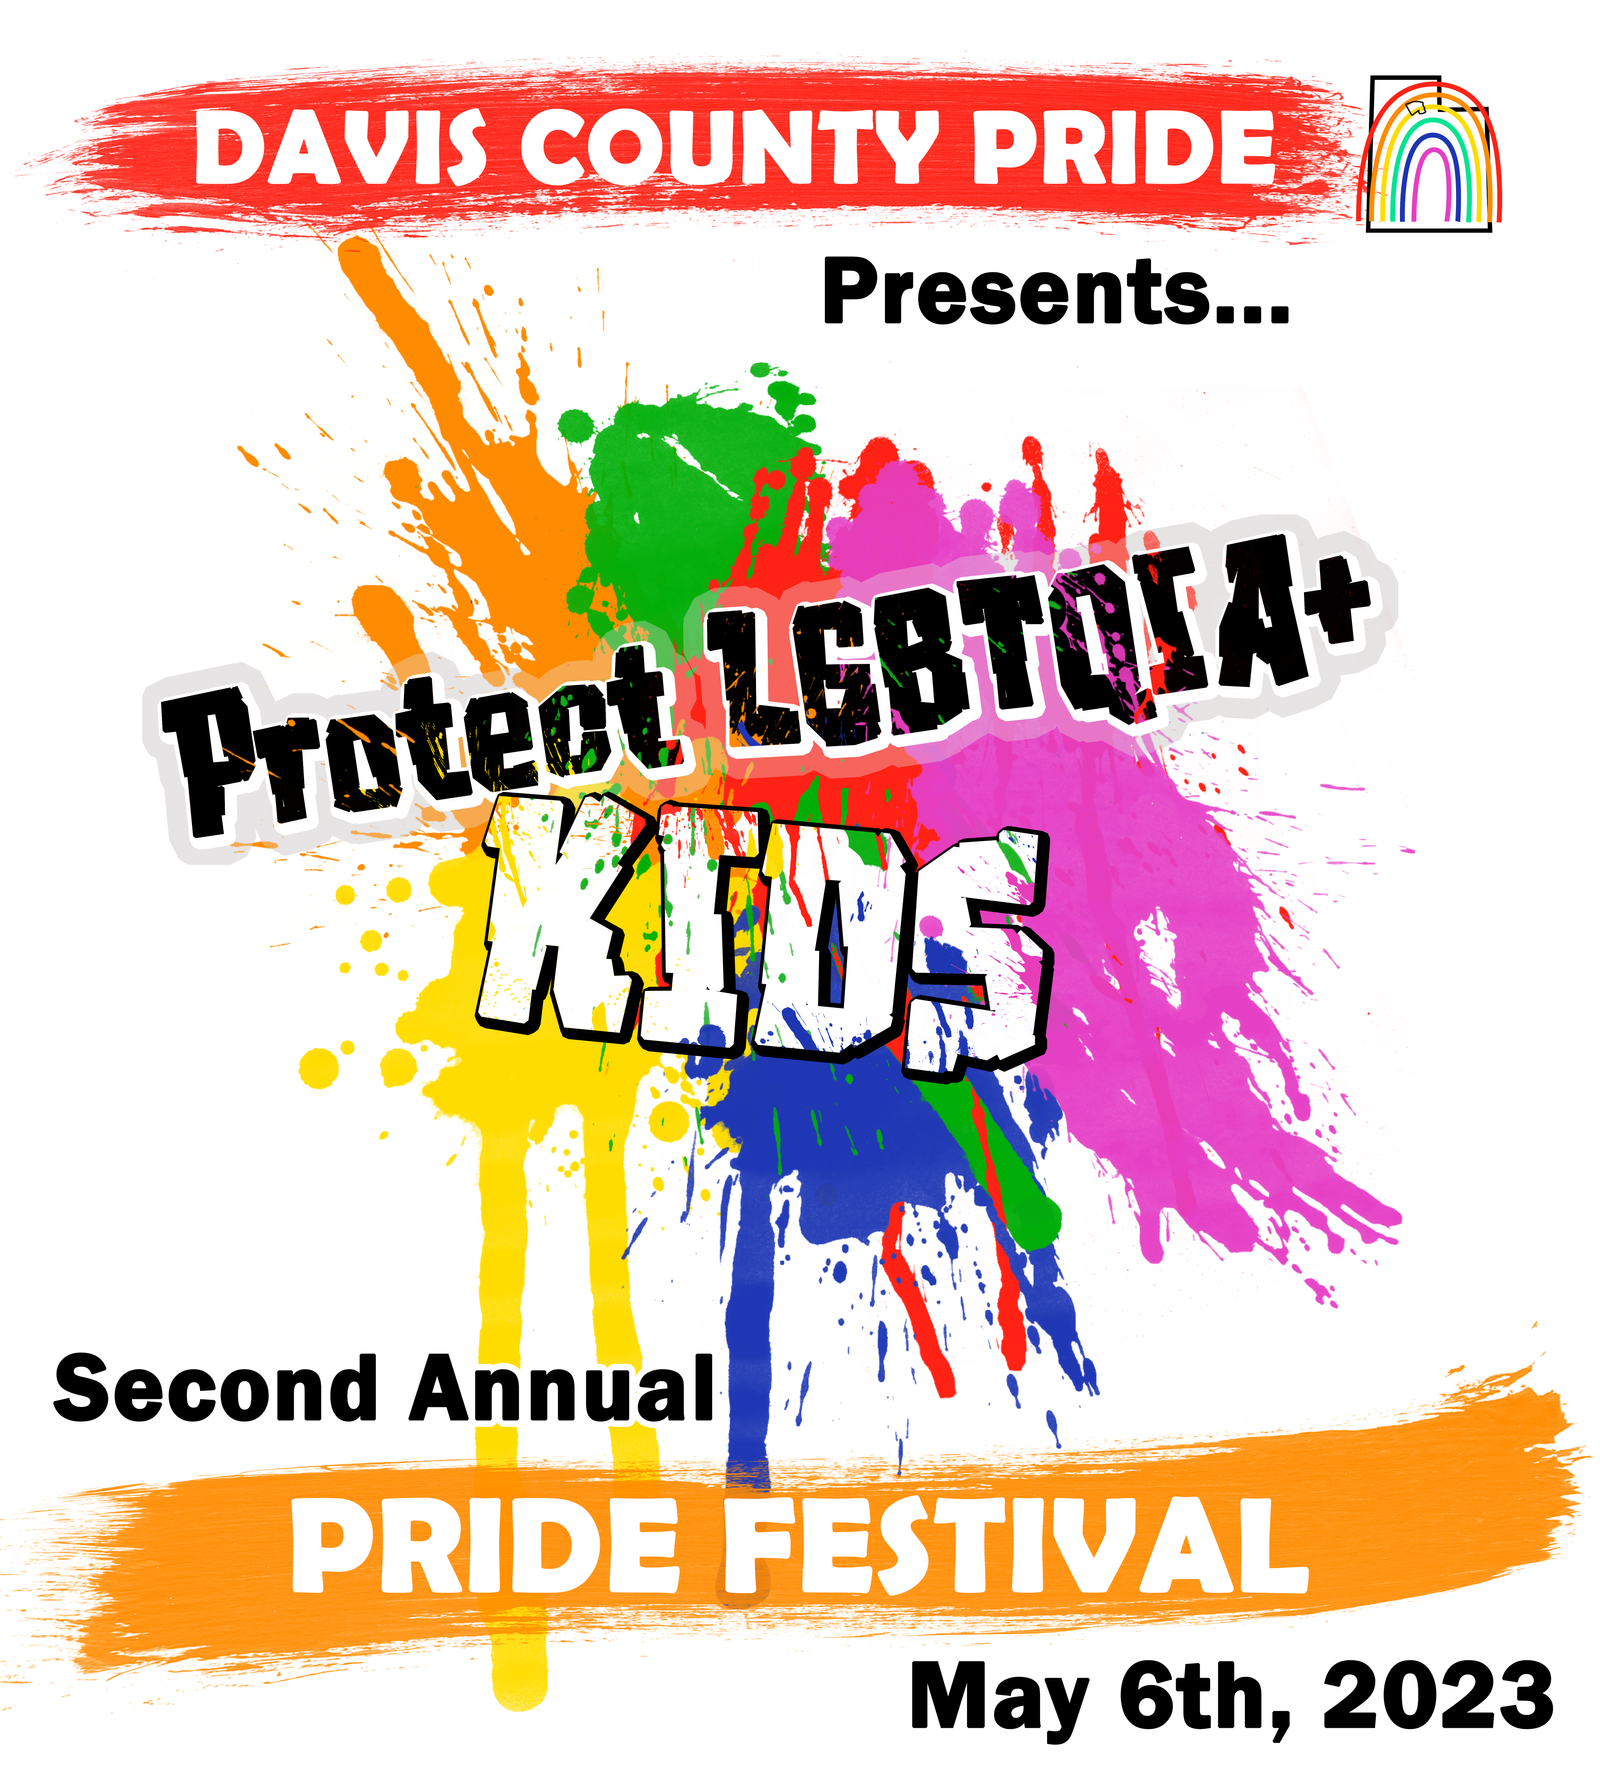 Mark Your Calendars! The Davis County Pride Festival is returning this May!